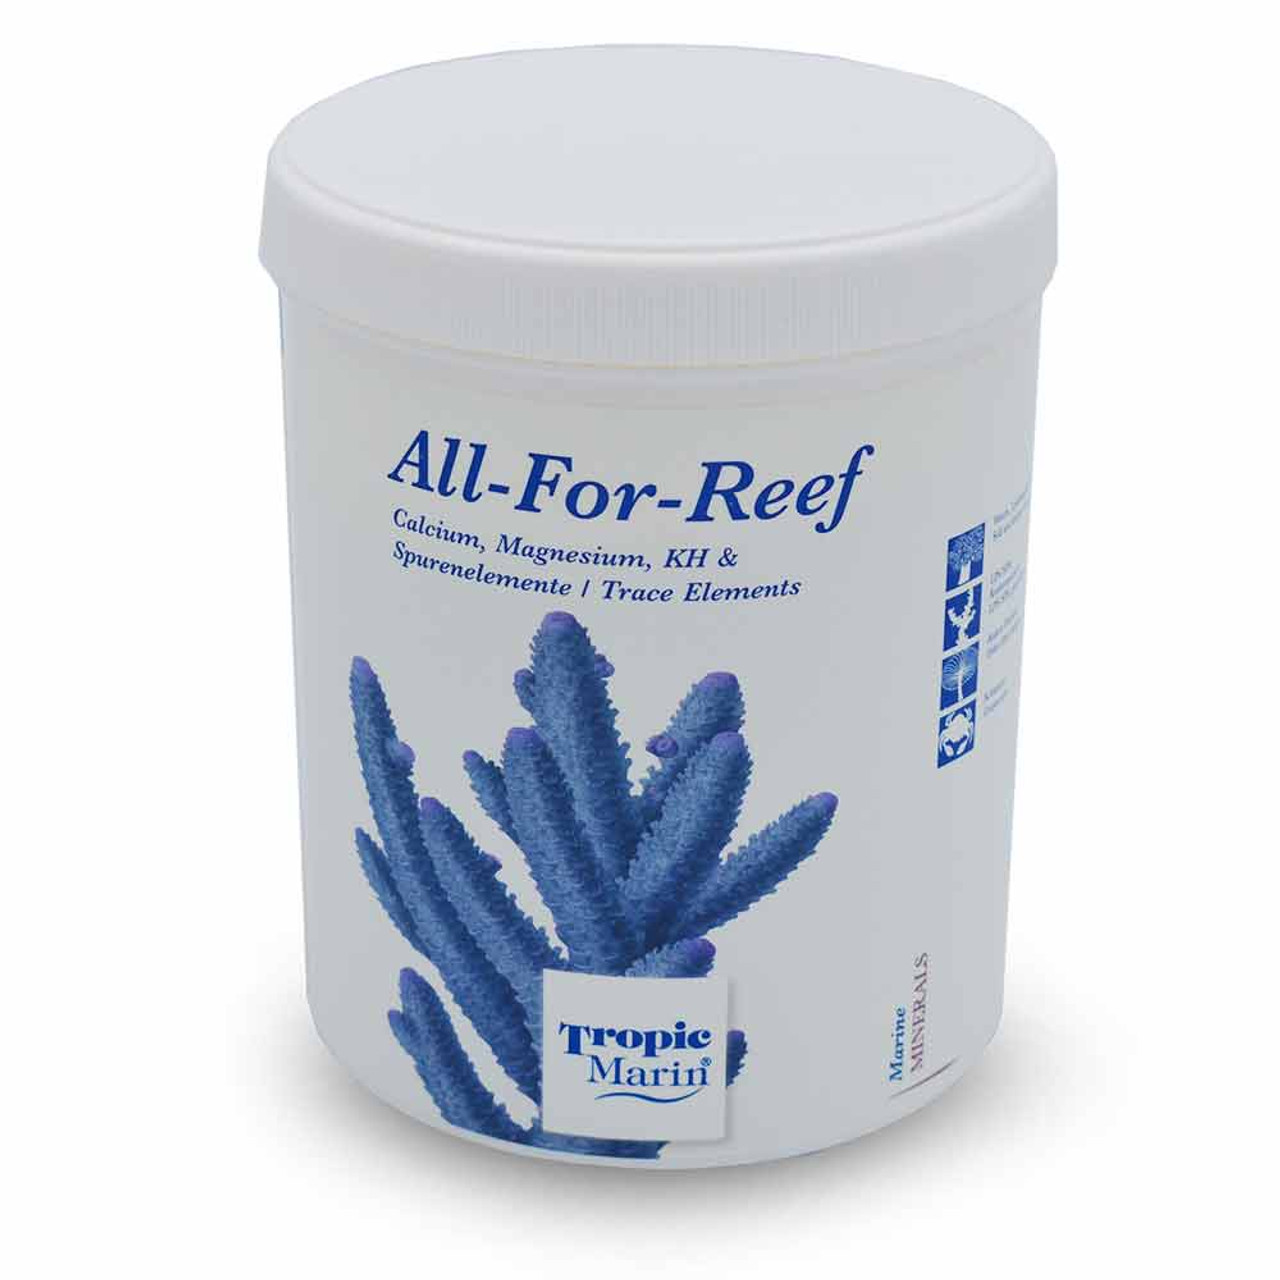 https://cdn11.bigcommerce.com/s-fh5tkm/images/stencil/1280x1280/products/7176/32727/All-For-Reef-Powder-Small-1000x1000__15595.1647271941.jpg?c=2?imbypass=on